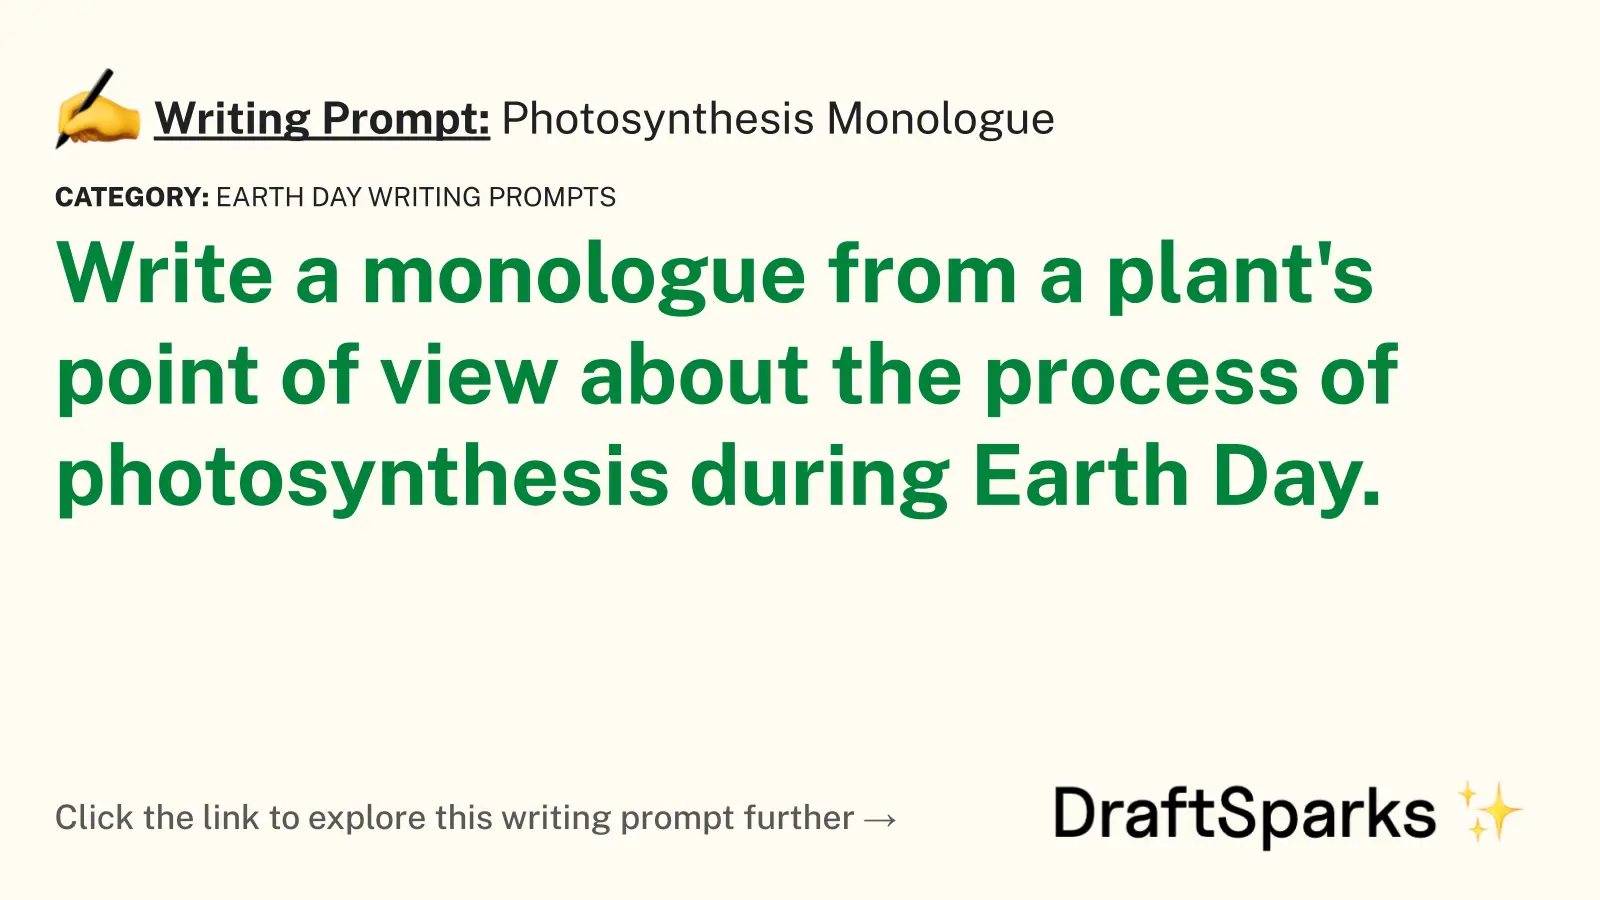 Photosynthesis Monologue